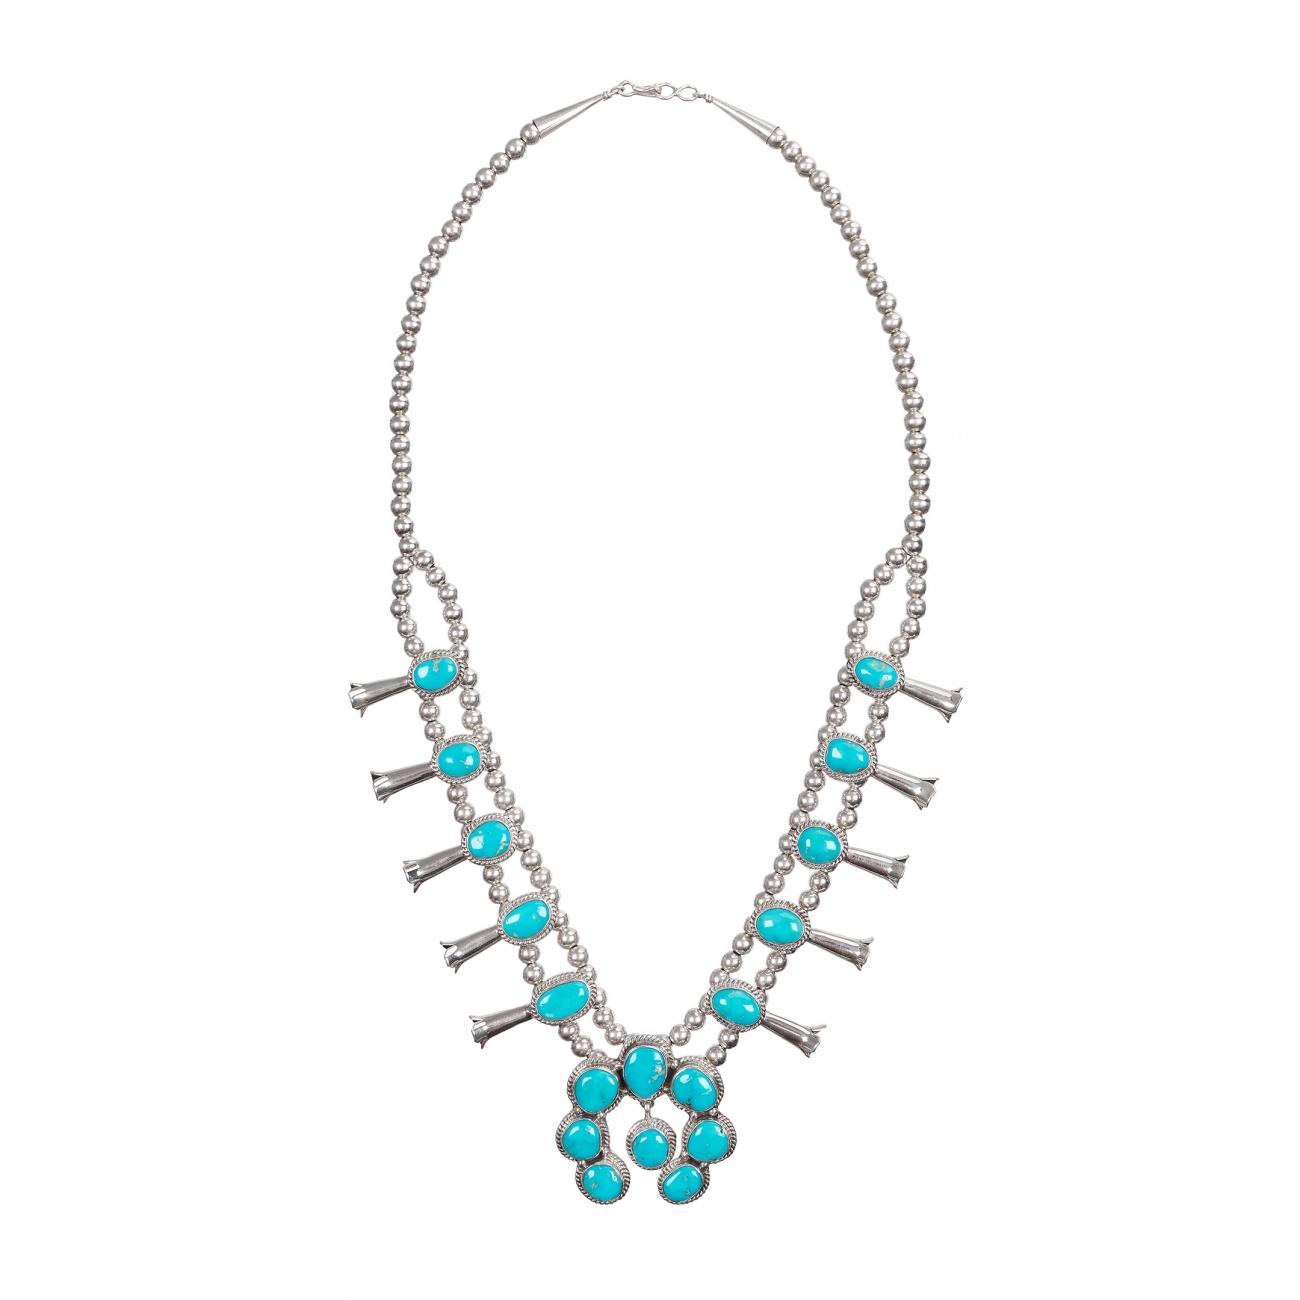 Necklace CO152 Squash Blossom in turquoise and silver - Harpo Paris